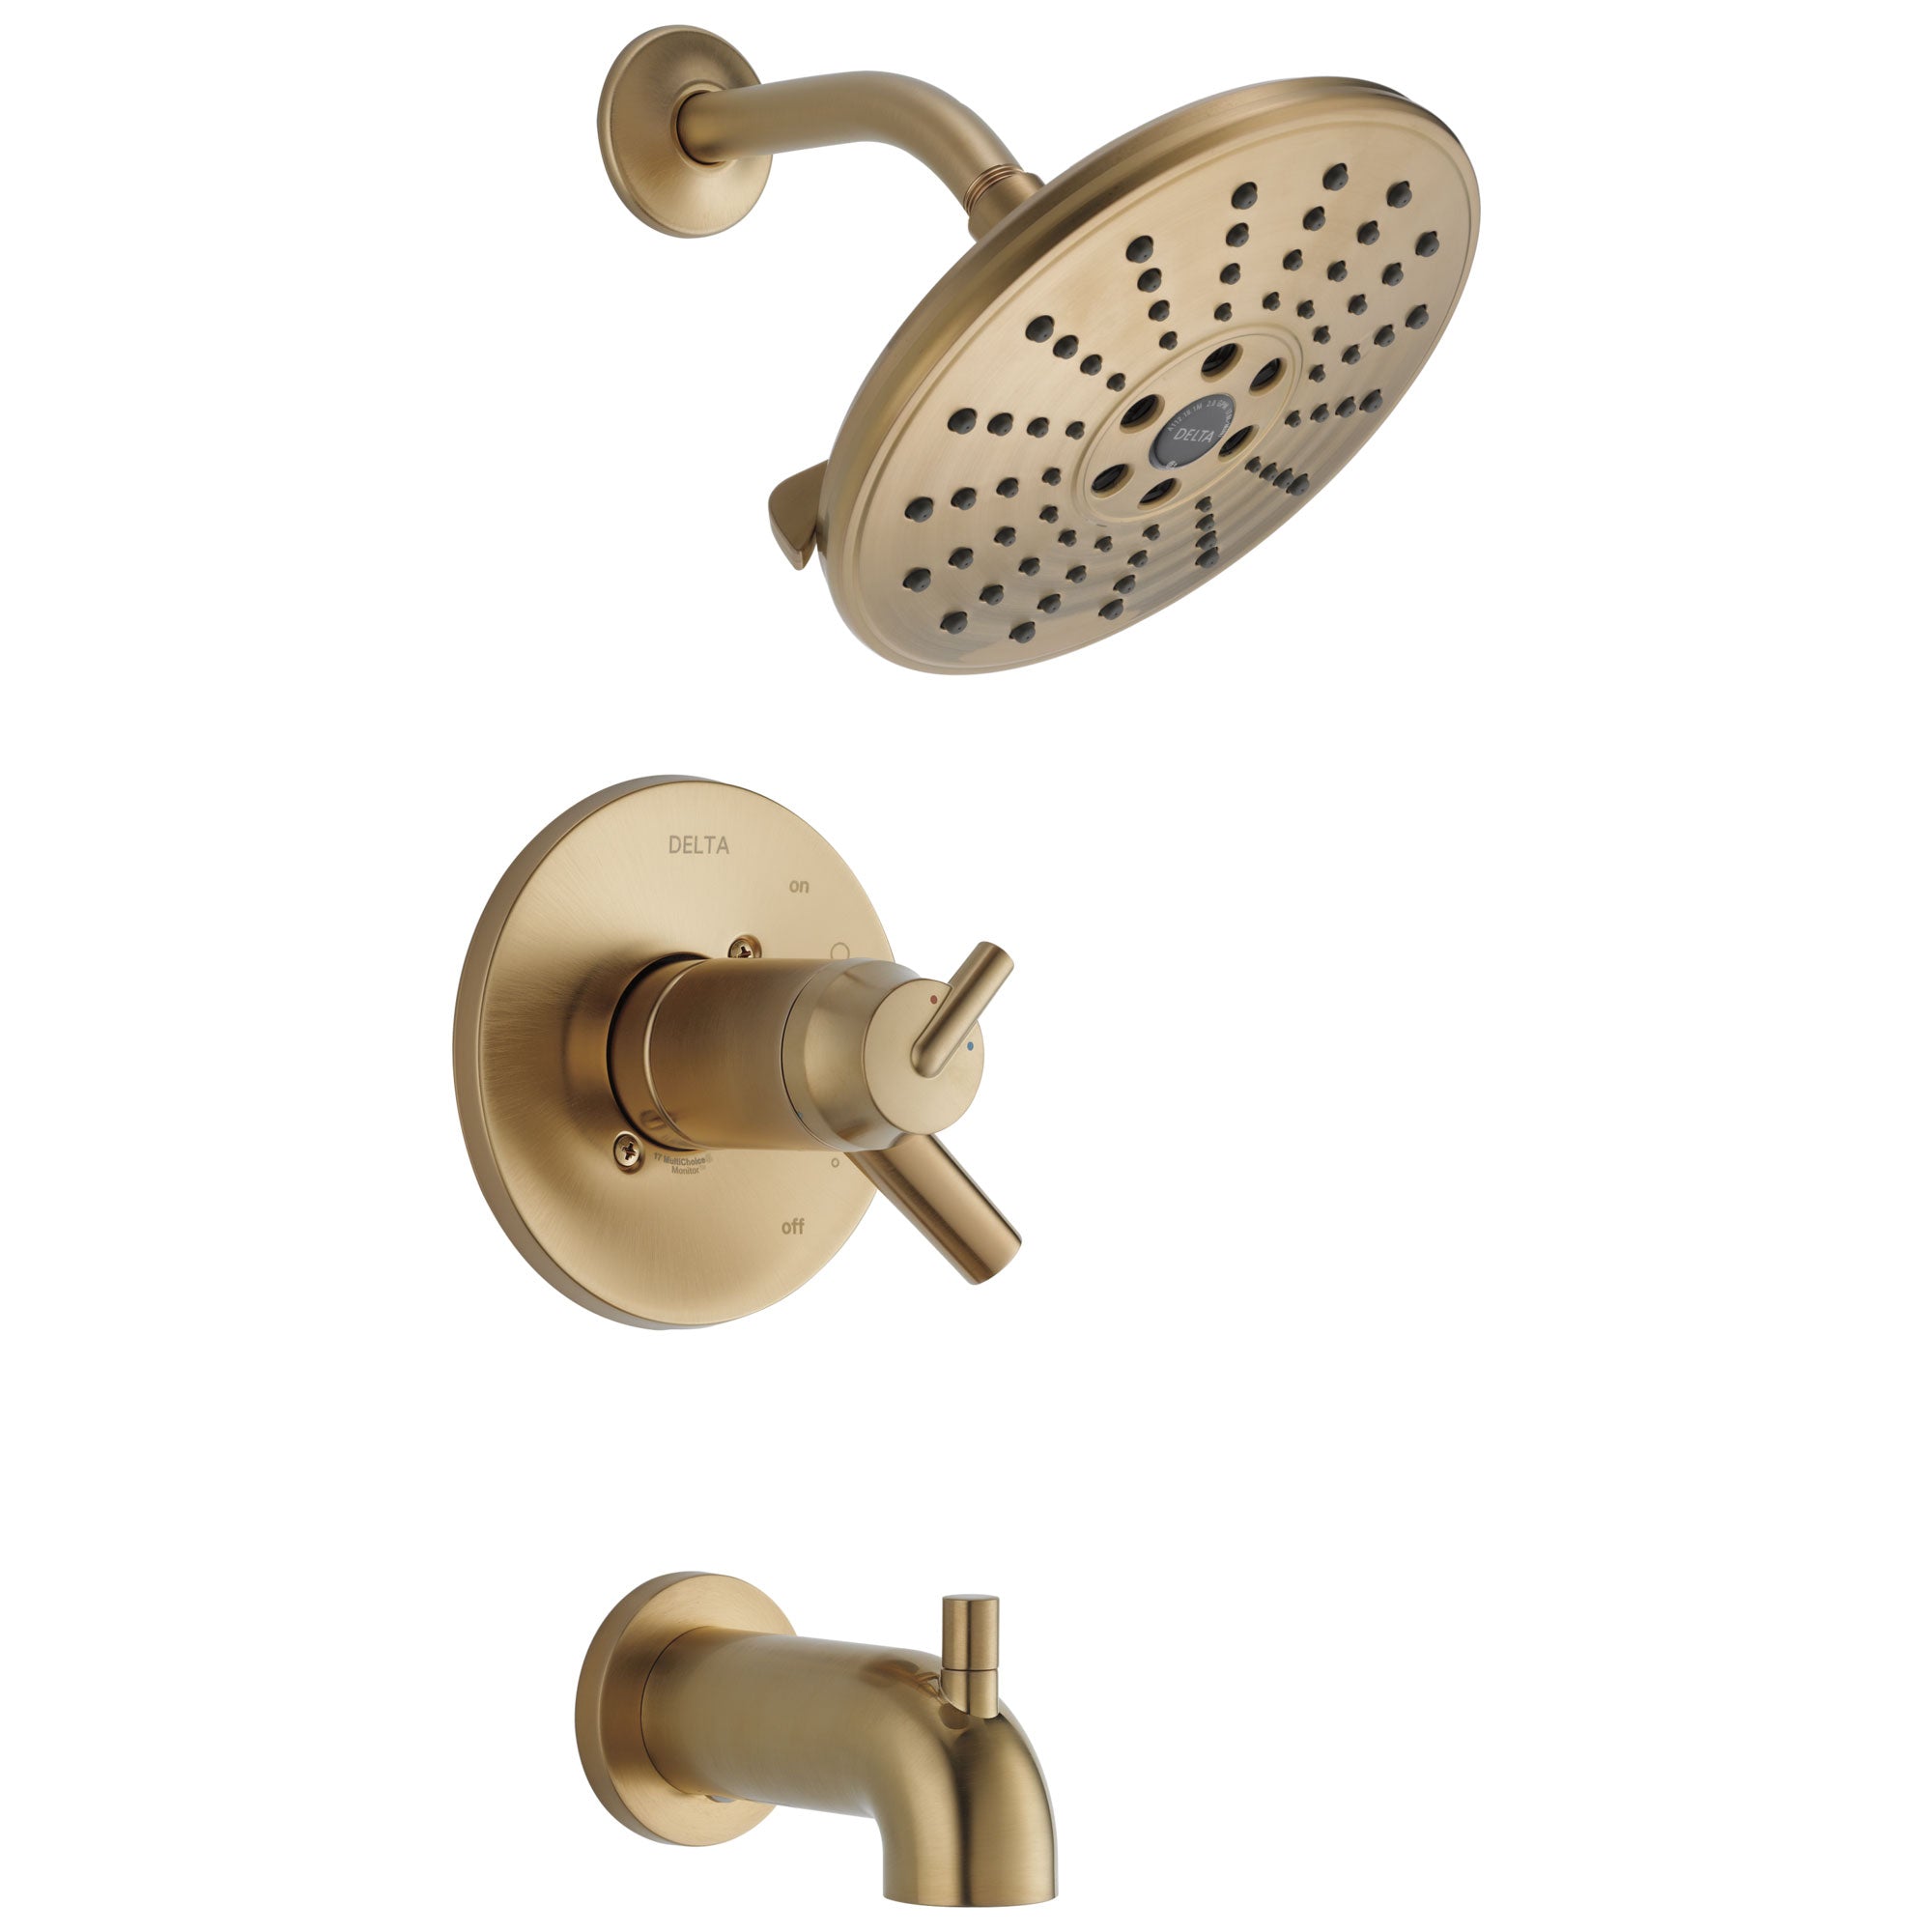 Delta Trinsic Collection Champagne Bronze TempAssure 17T Series Watersense Thermostatic Tub T Shower Combo Faucet Includes Valve with Stops D2236V